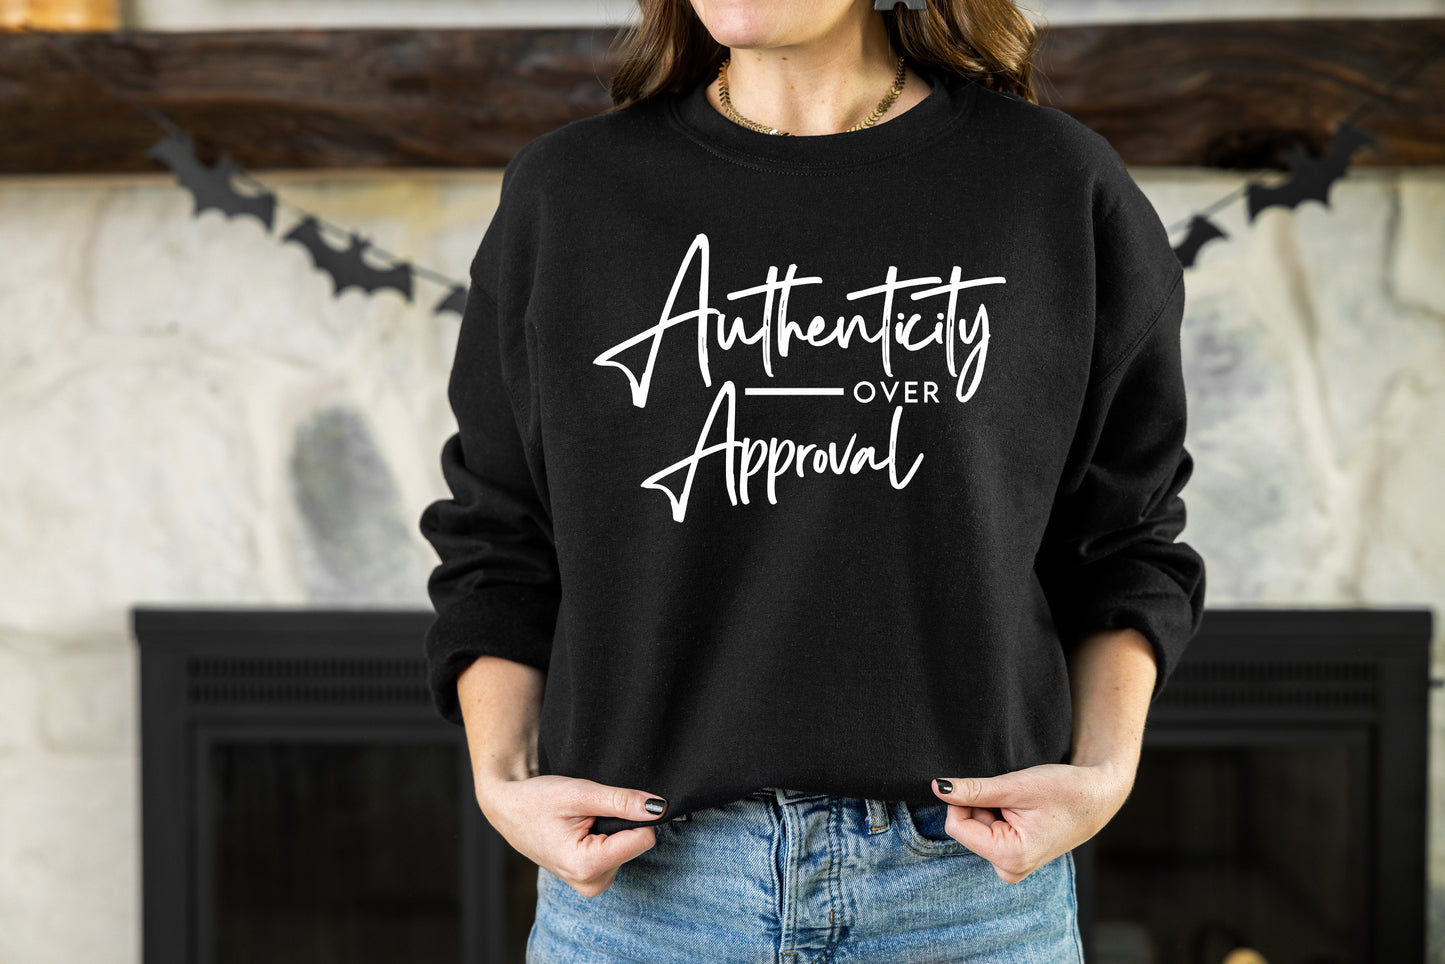 Authenticity over Approval